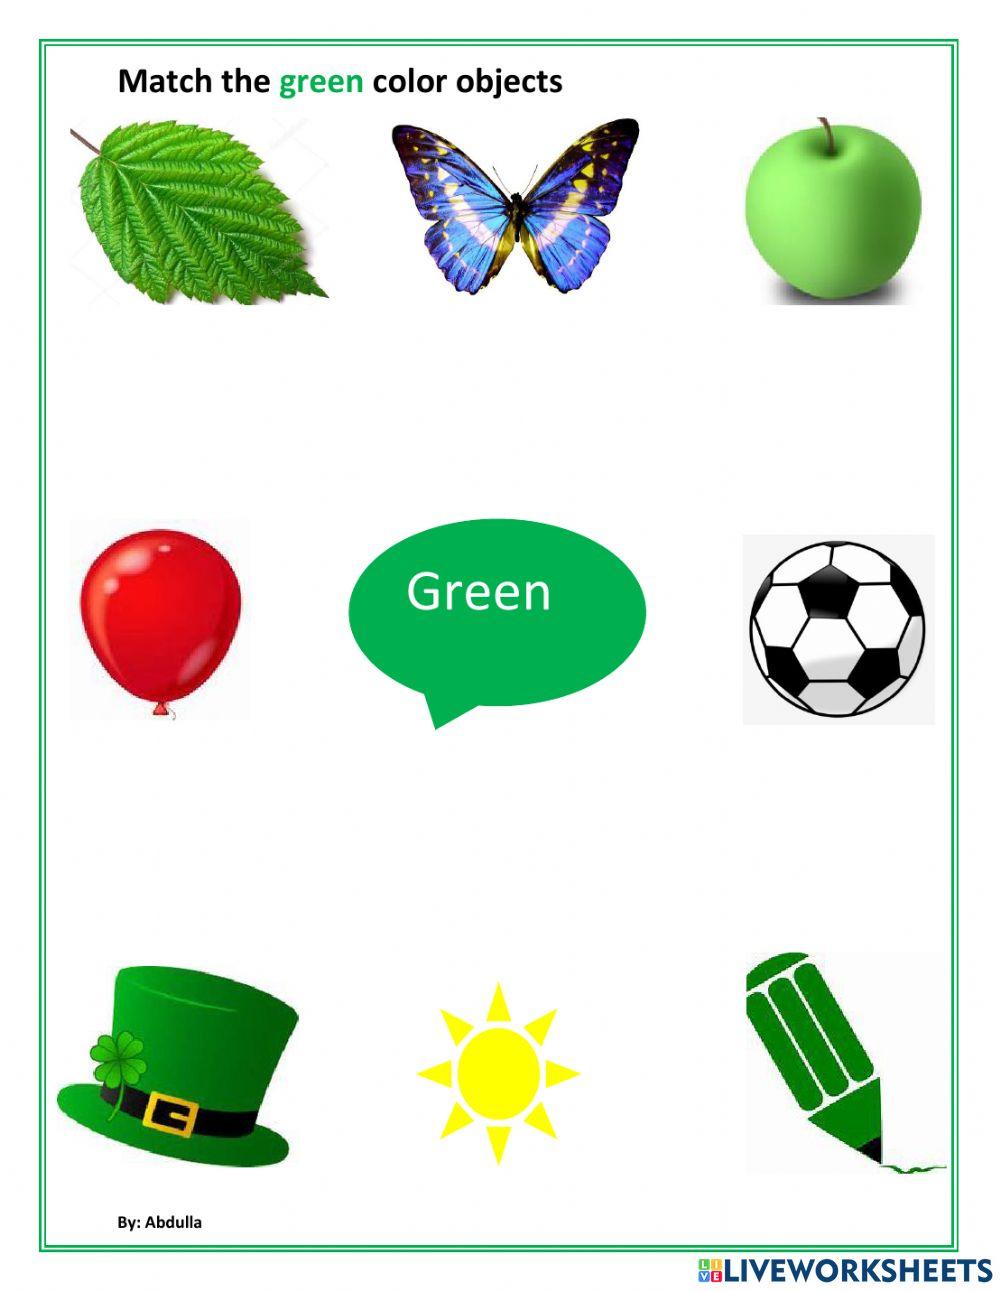 Match the green color objects